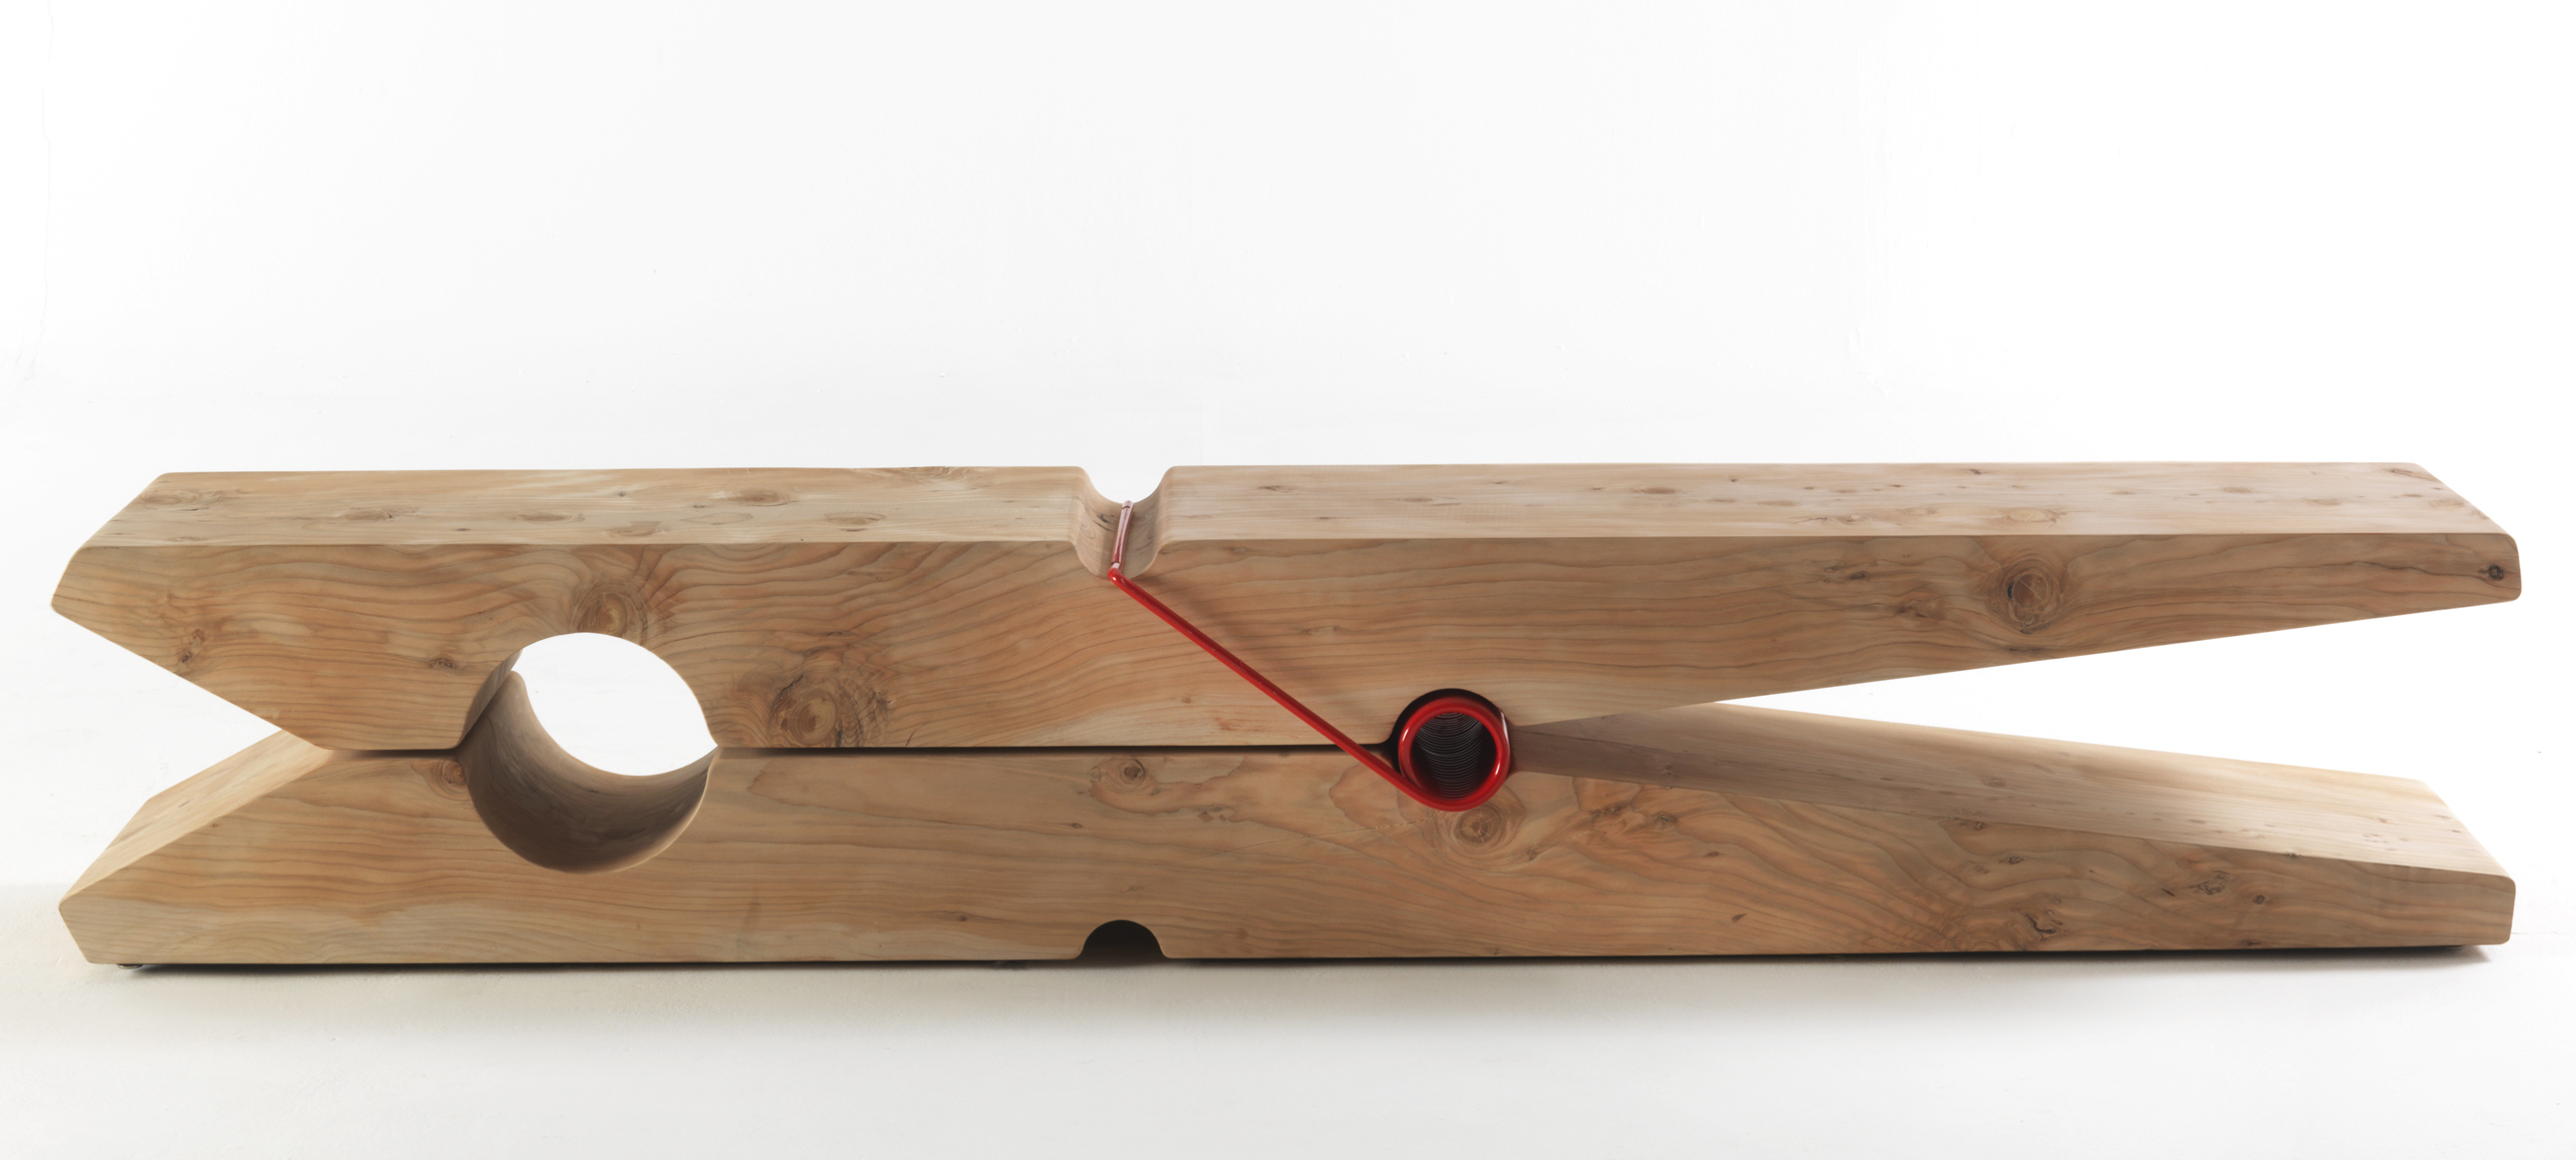 Giant Clothespin Bench